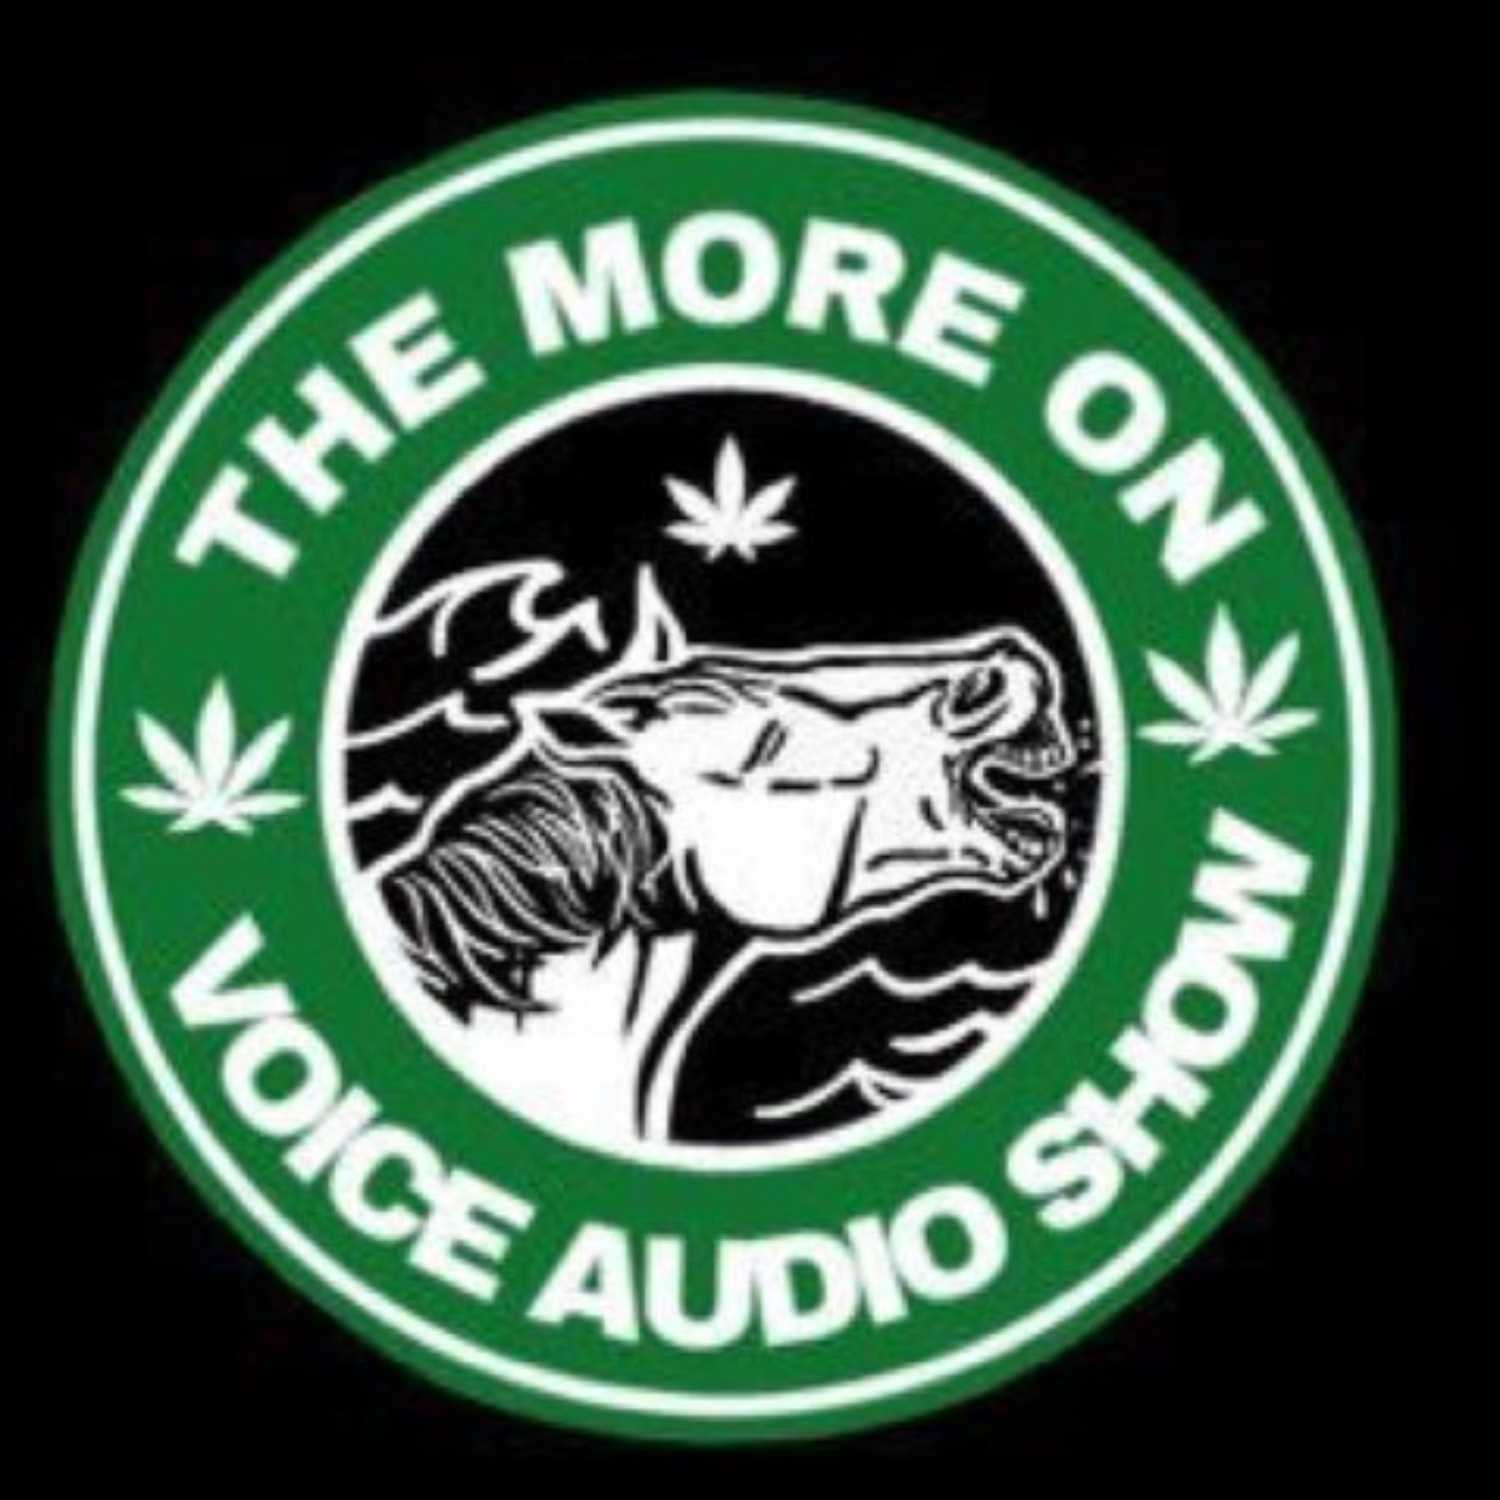 The More On Voice Audio Show: Episode 55 (Josh Bankhead)